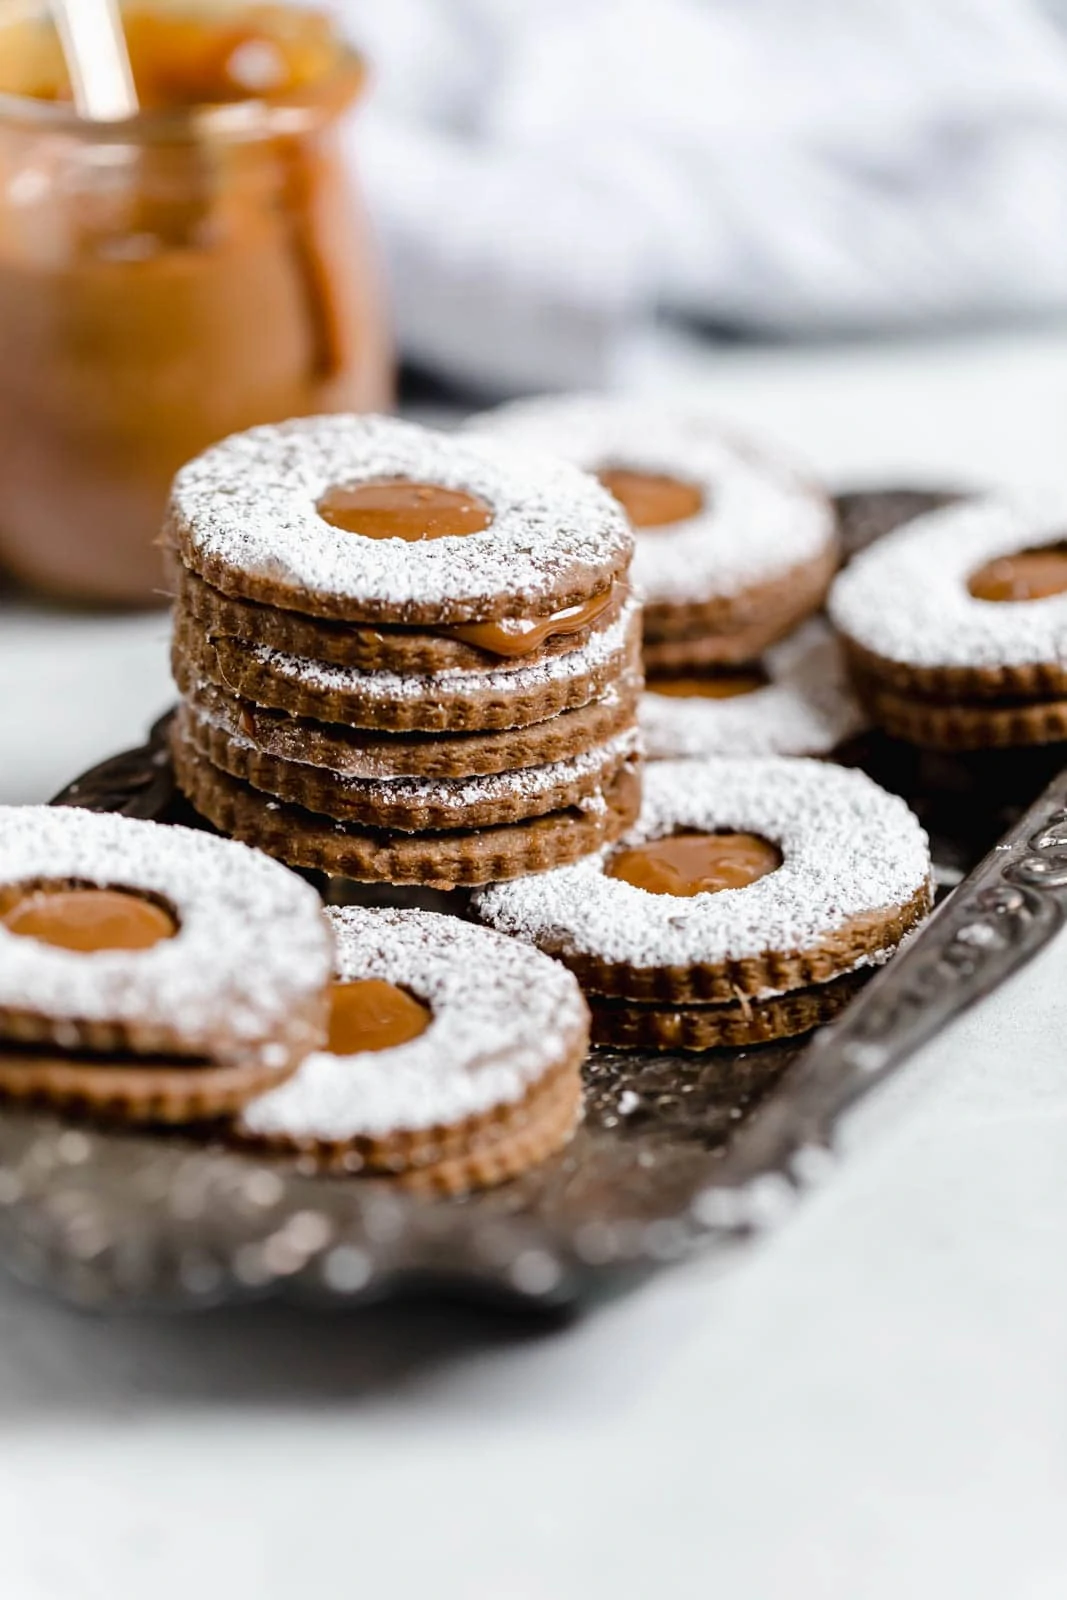 Santa, meet your new favorite cookie. Seriously obsessed with these Gingerbread Linzer Cookies with dulce de leche centers.